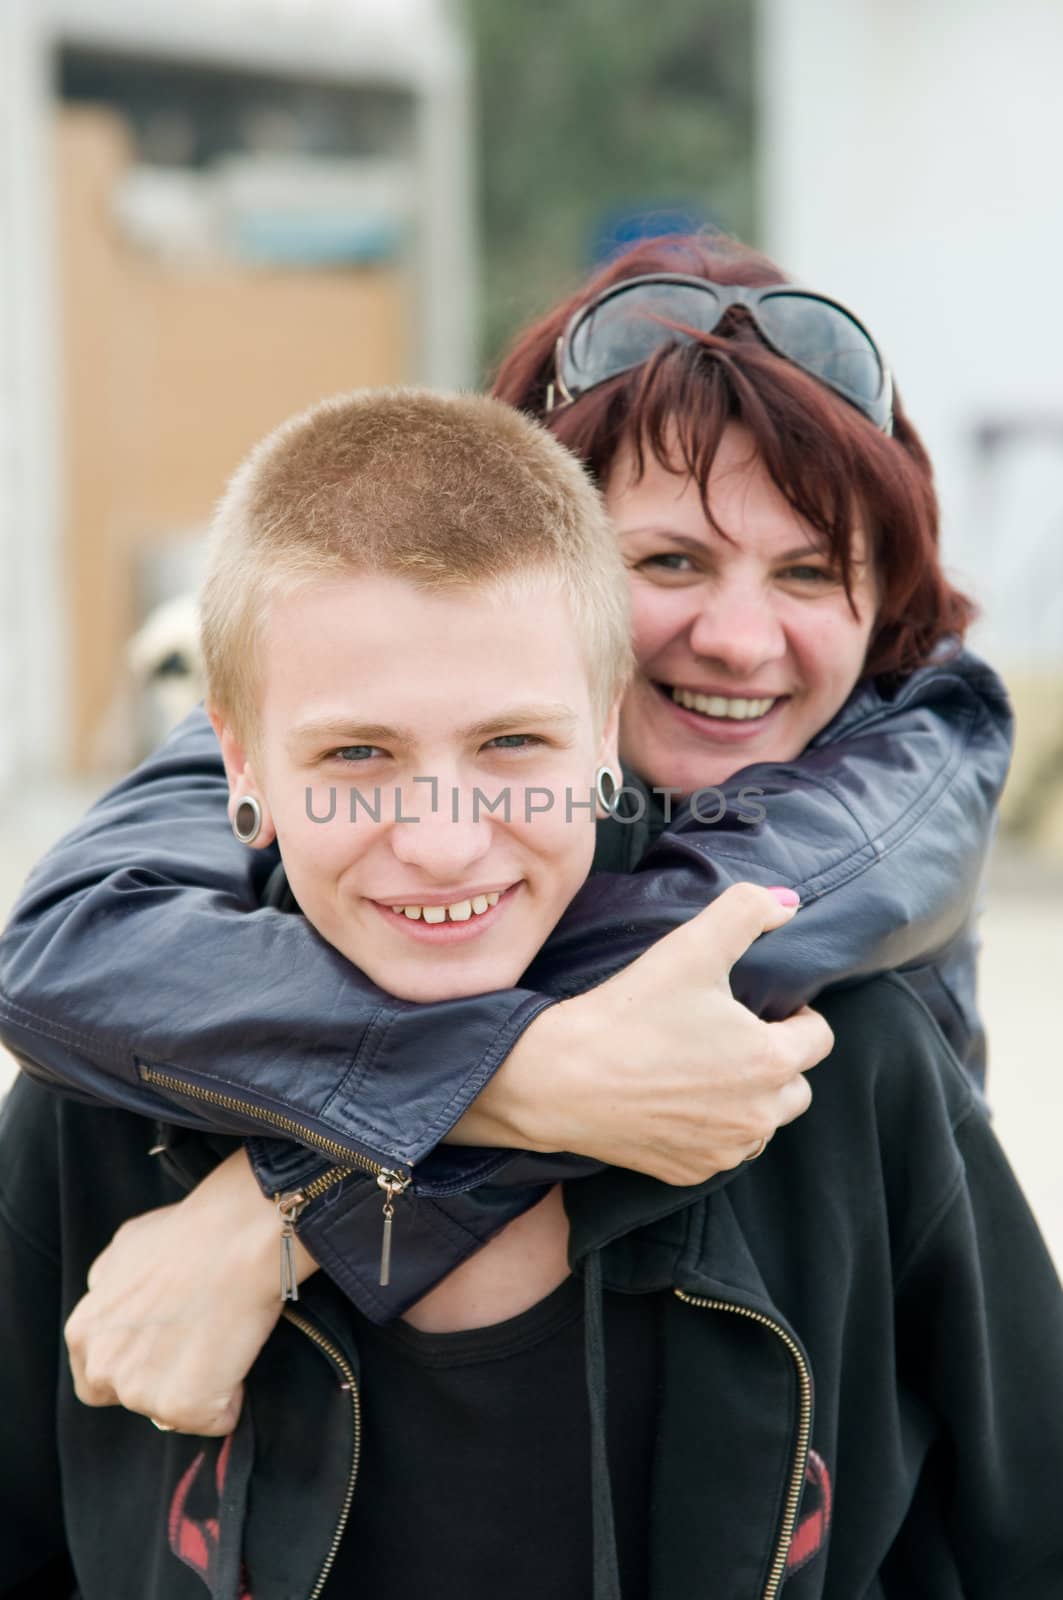 The happy mother and a son hugging and laughing